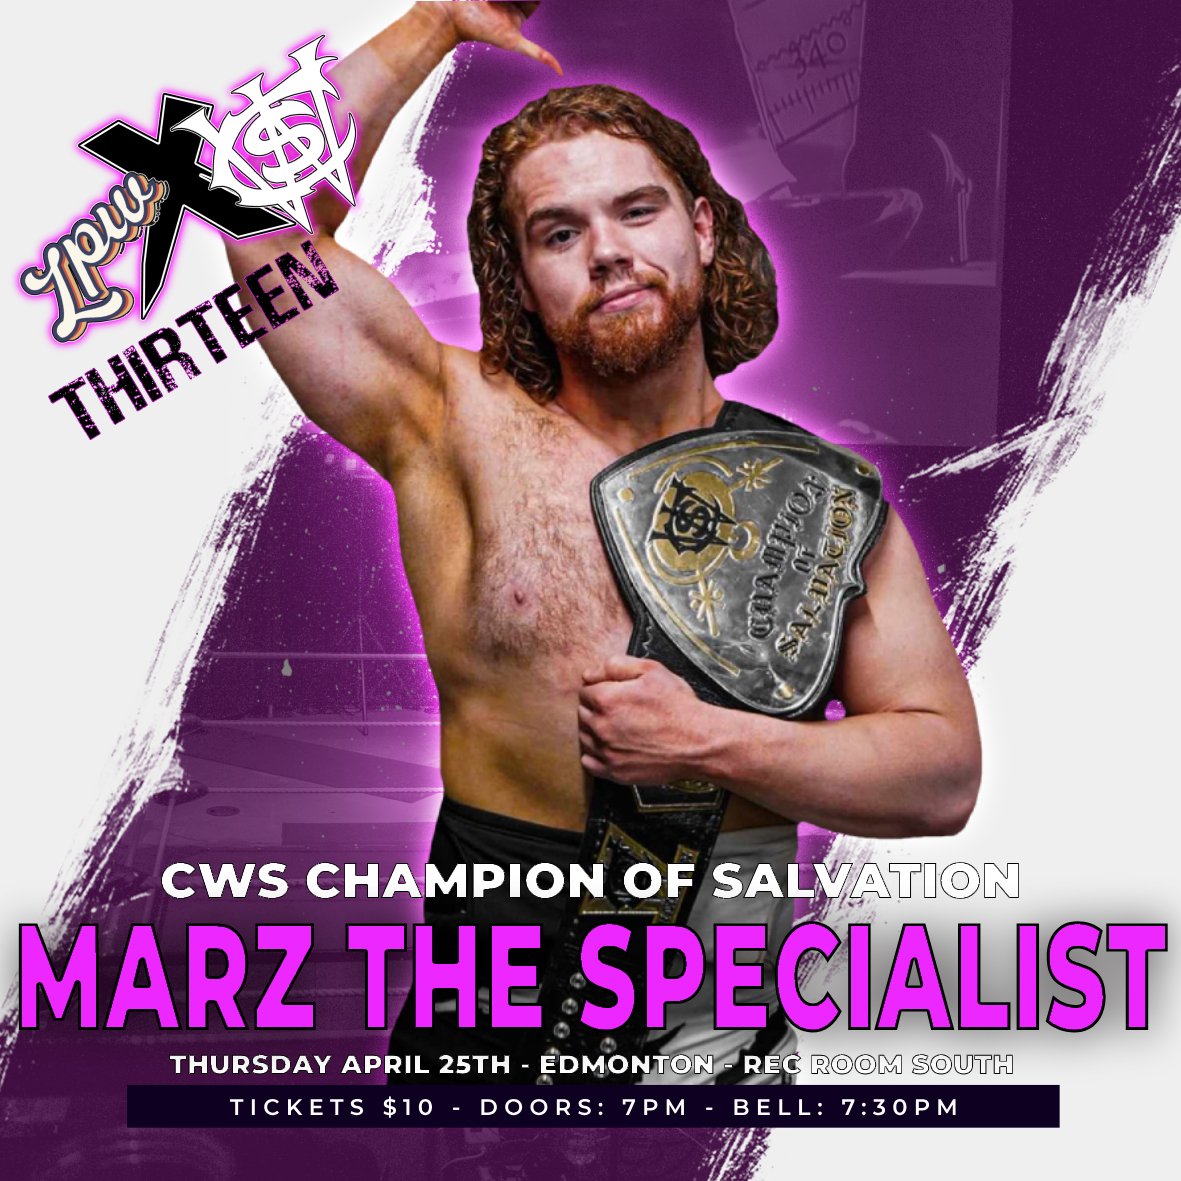 🚨LIVE WRESTLING! EDMONTON!🚨 LPWxCWS #13 - A PREQUEL TO LPW25 THURSDAY! MARCH 28TH! AT THE REC ROOM SOUTH! FEATURING A CWS CHAMPION OF SALVATION TITLE DEFENSE BY CURRENT CHAMPION MARZ THE SPECIALIST TICKETS AVAILABLE IN ADVANCE AT THE LINK OR AT THE DOOR FOR ONLY $10(+fees)!